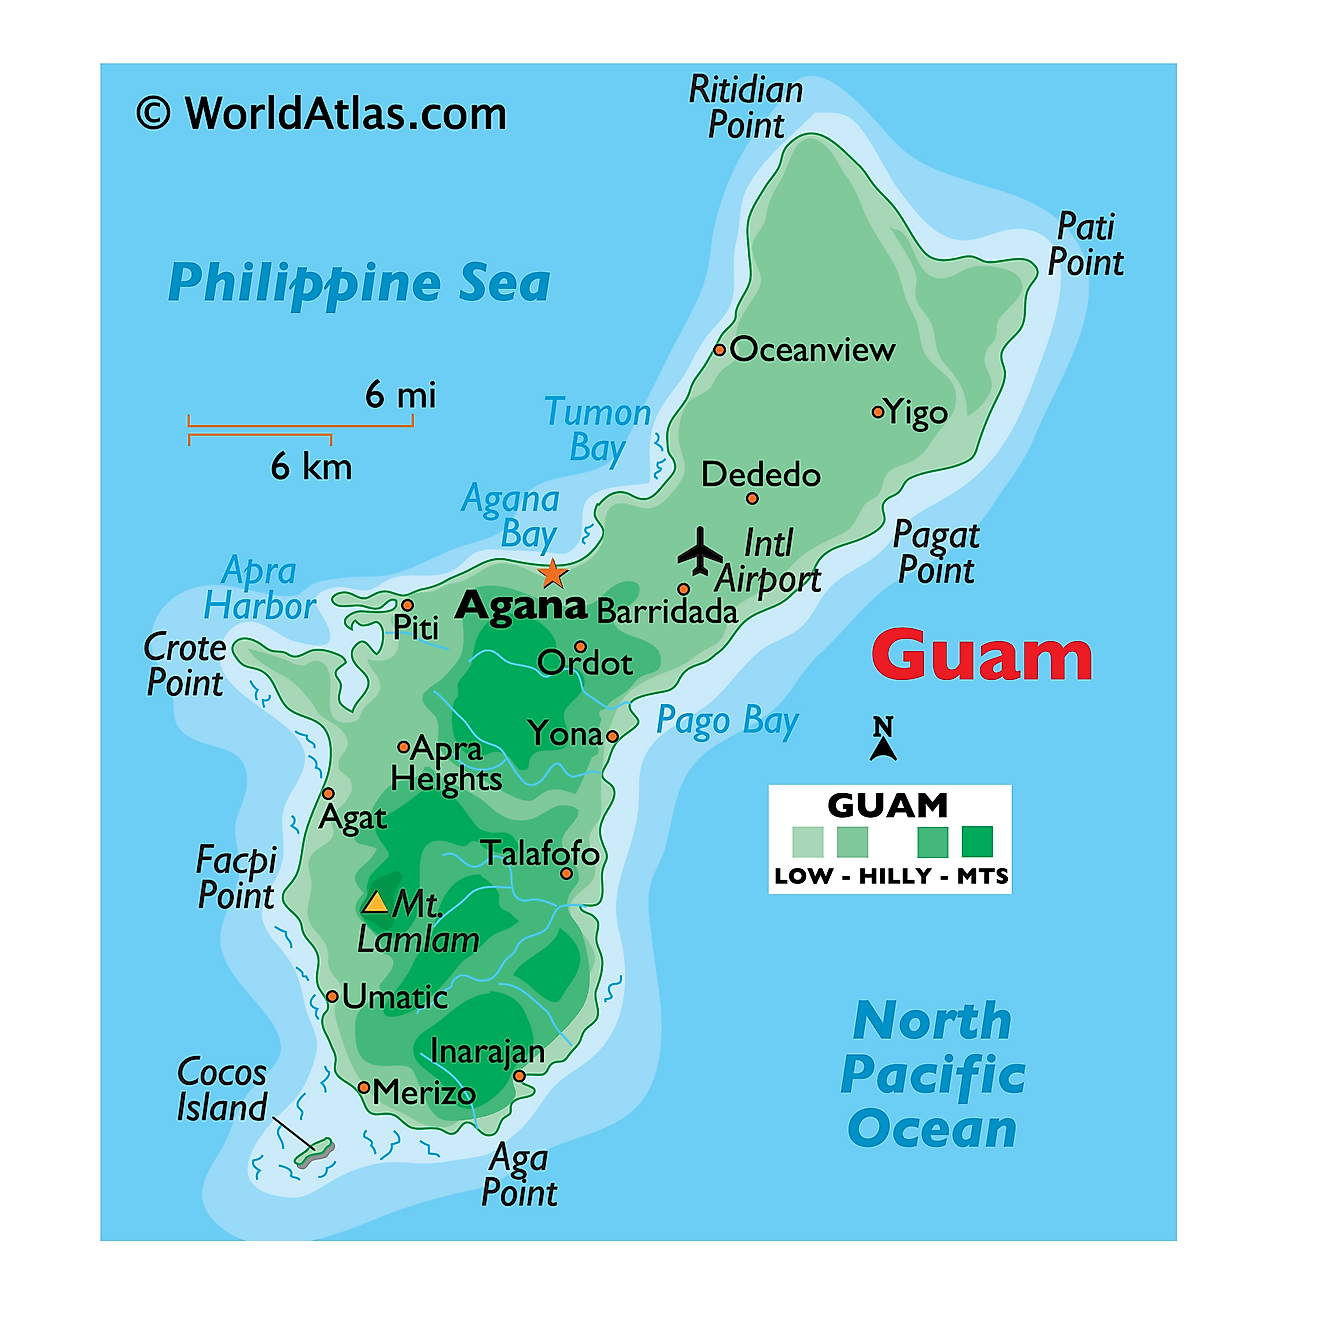 Physical Map of Guam showing relief, highest point, islands, international airport, important settlements, capital, and more.